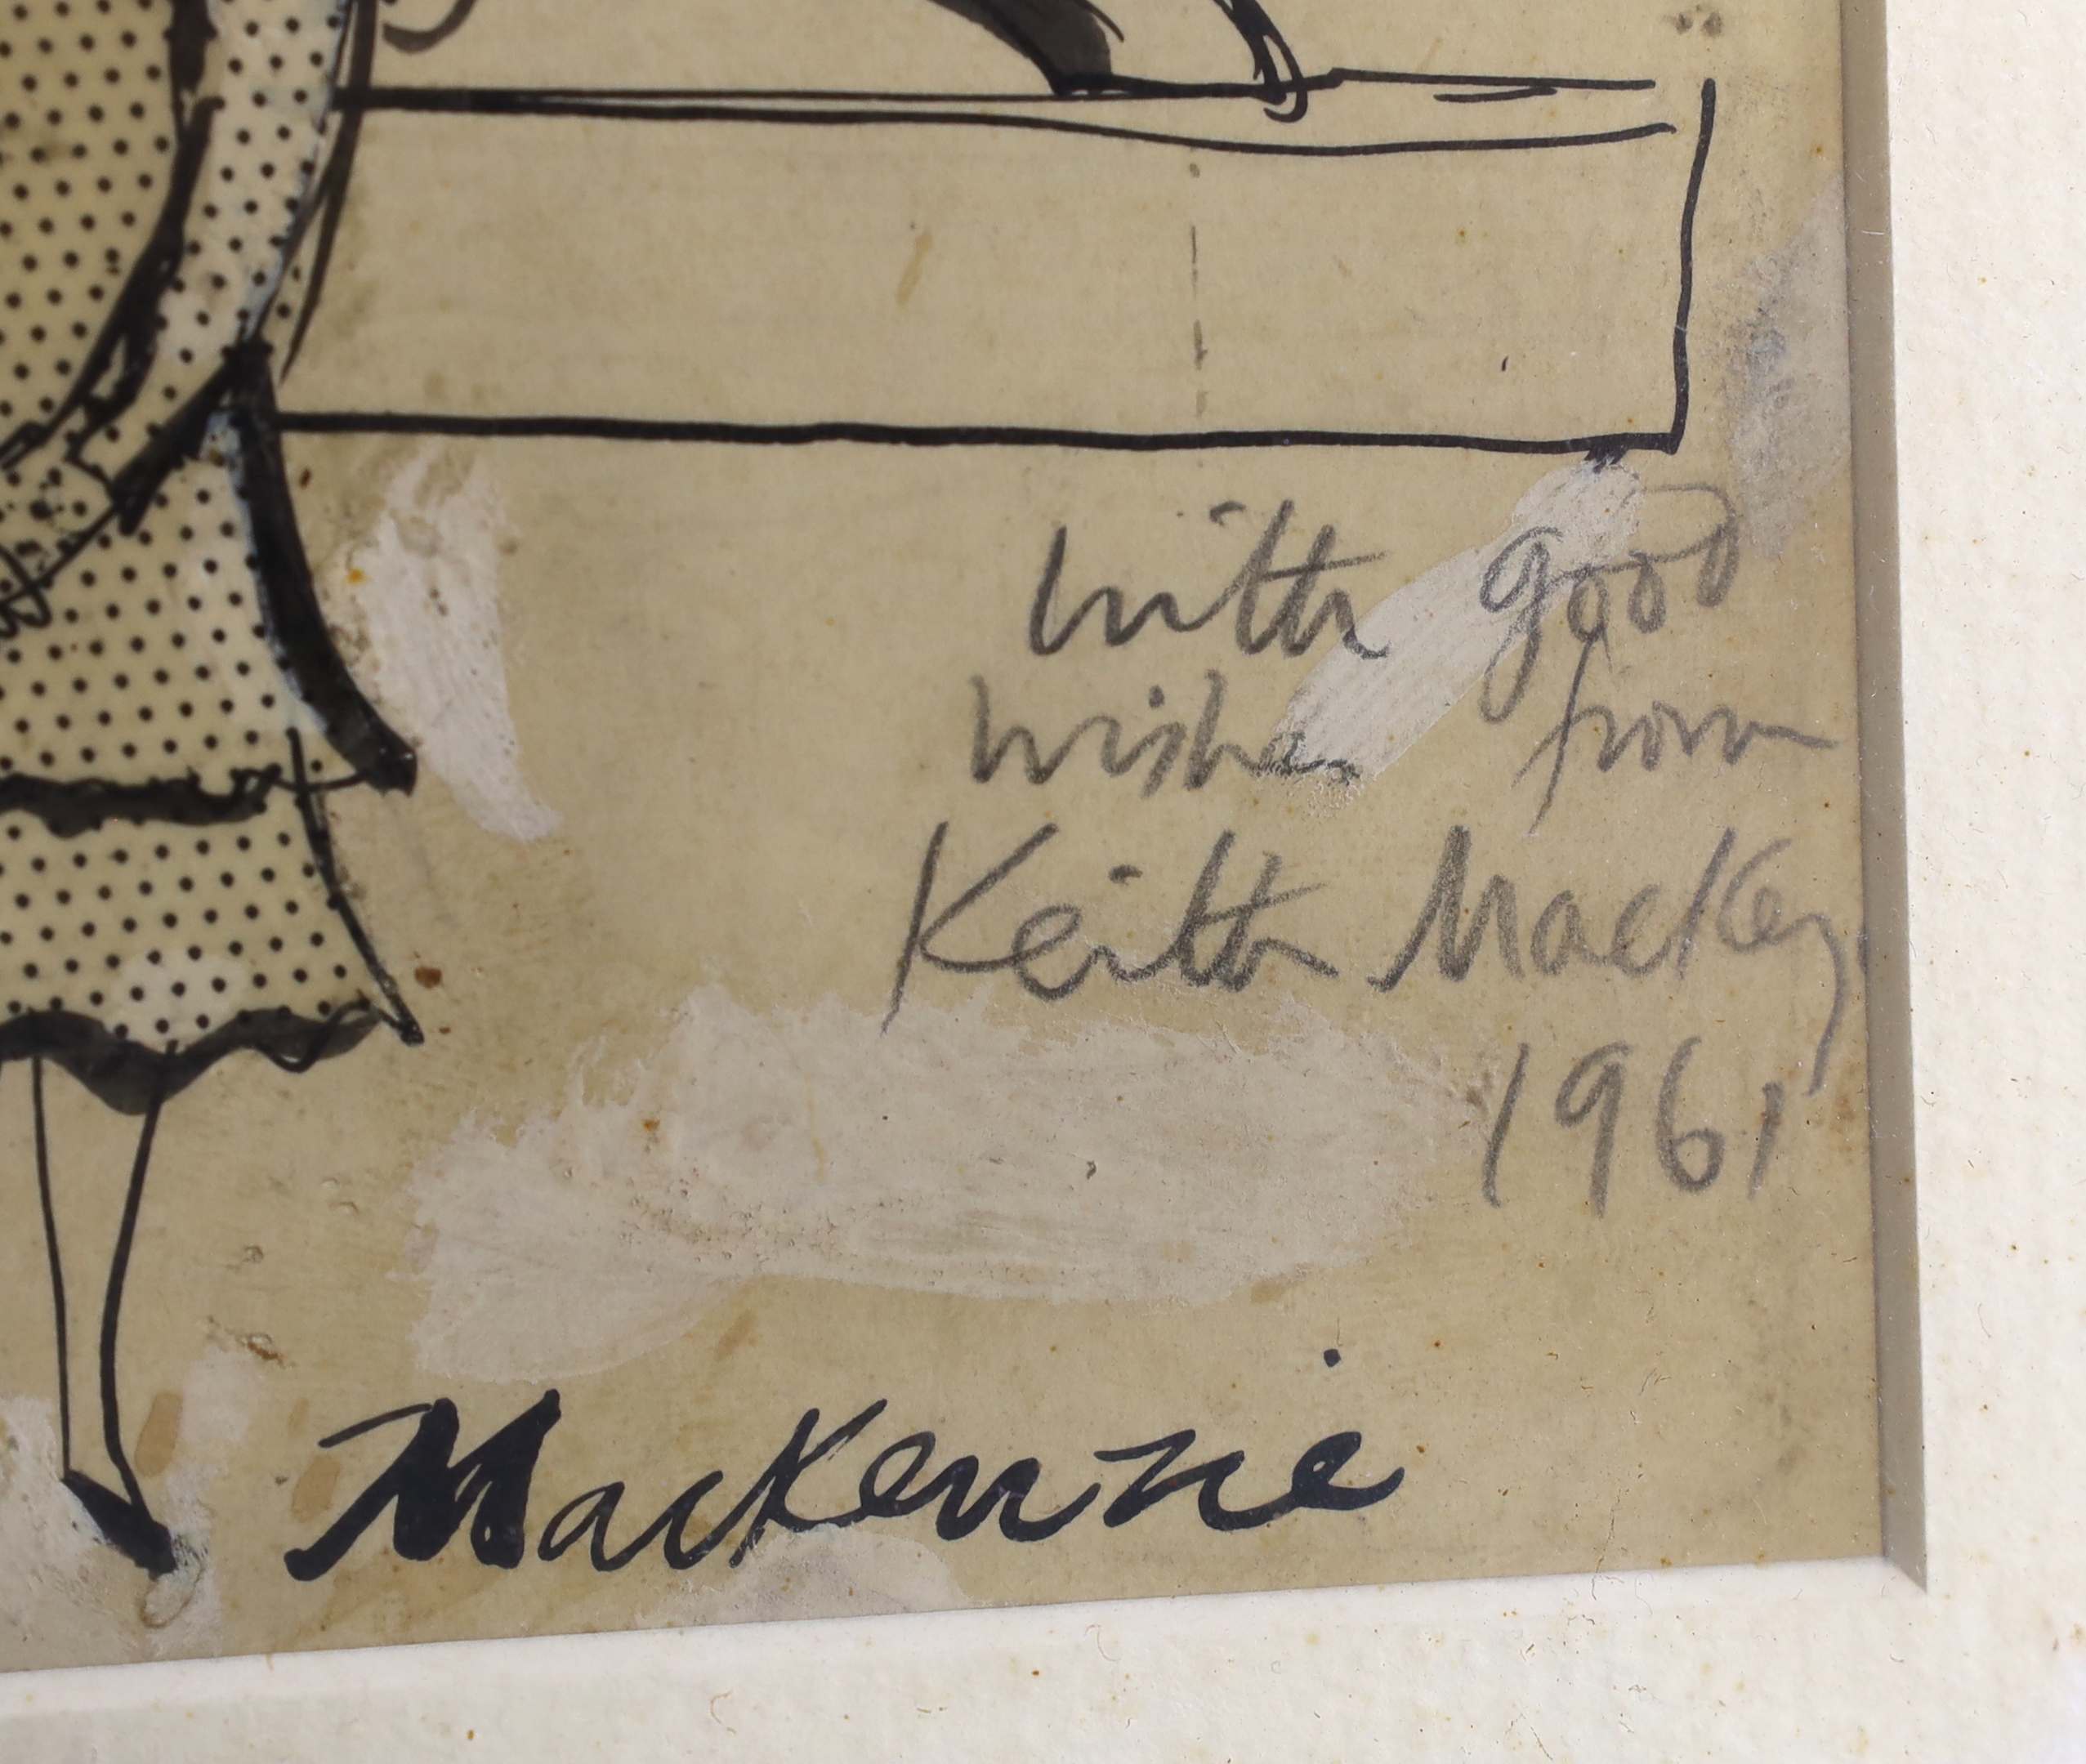 Keith Mackenzie, heightened monochrome illustration, 'Four figures', signed and inscribed 'With good wishes from Keith Mackenzie 1961', 25 x 22cm